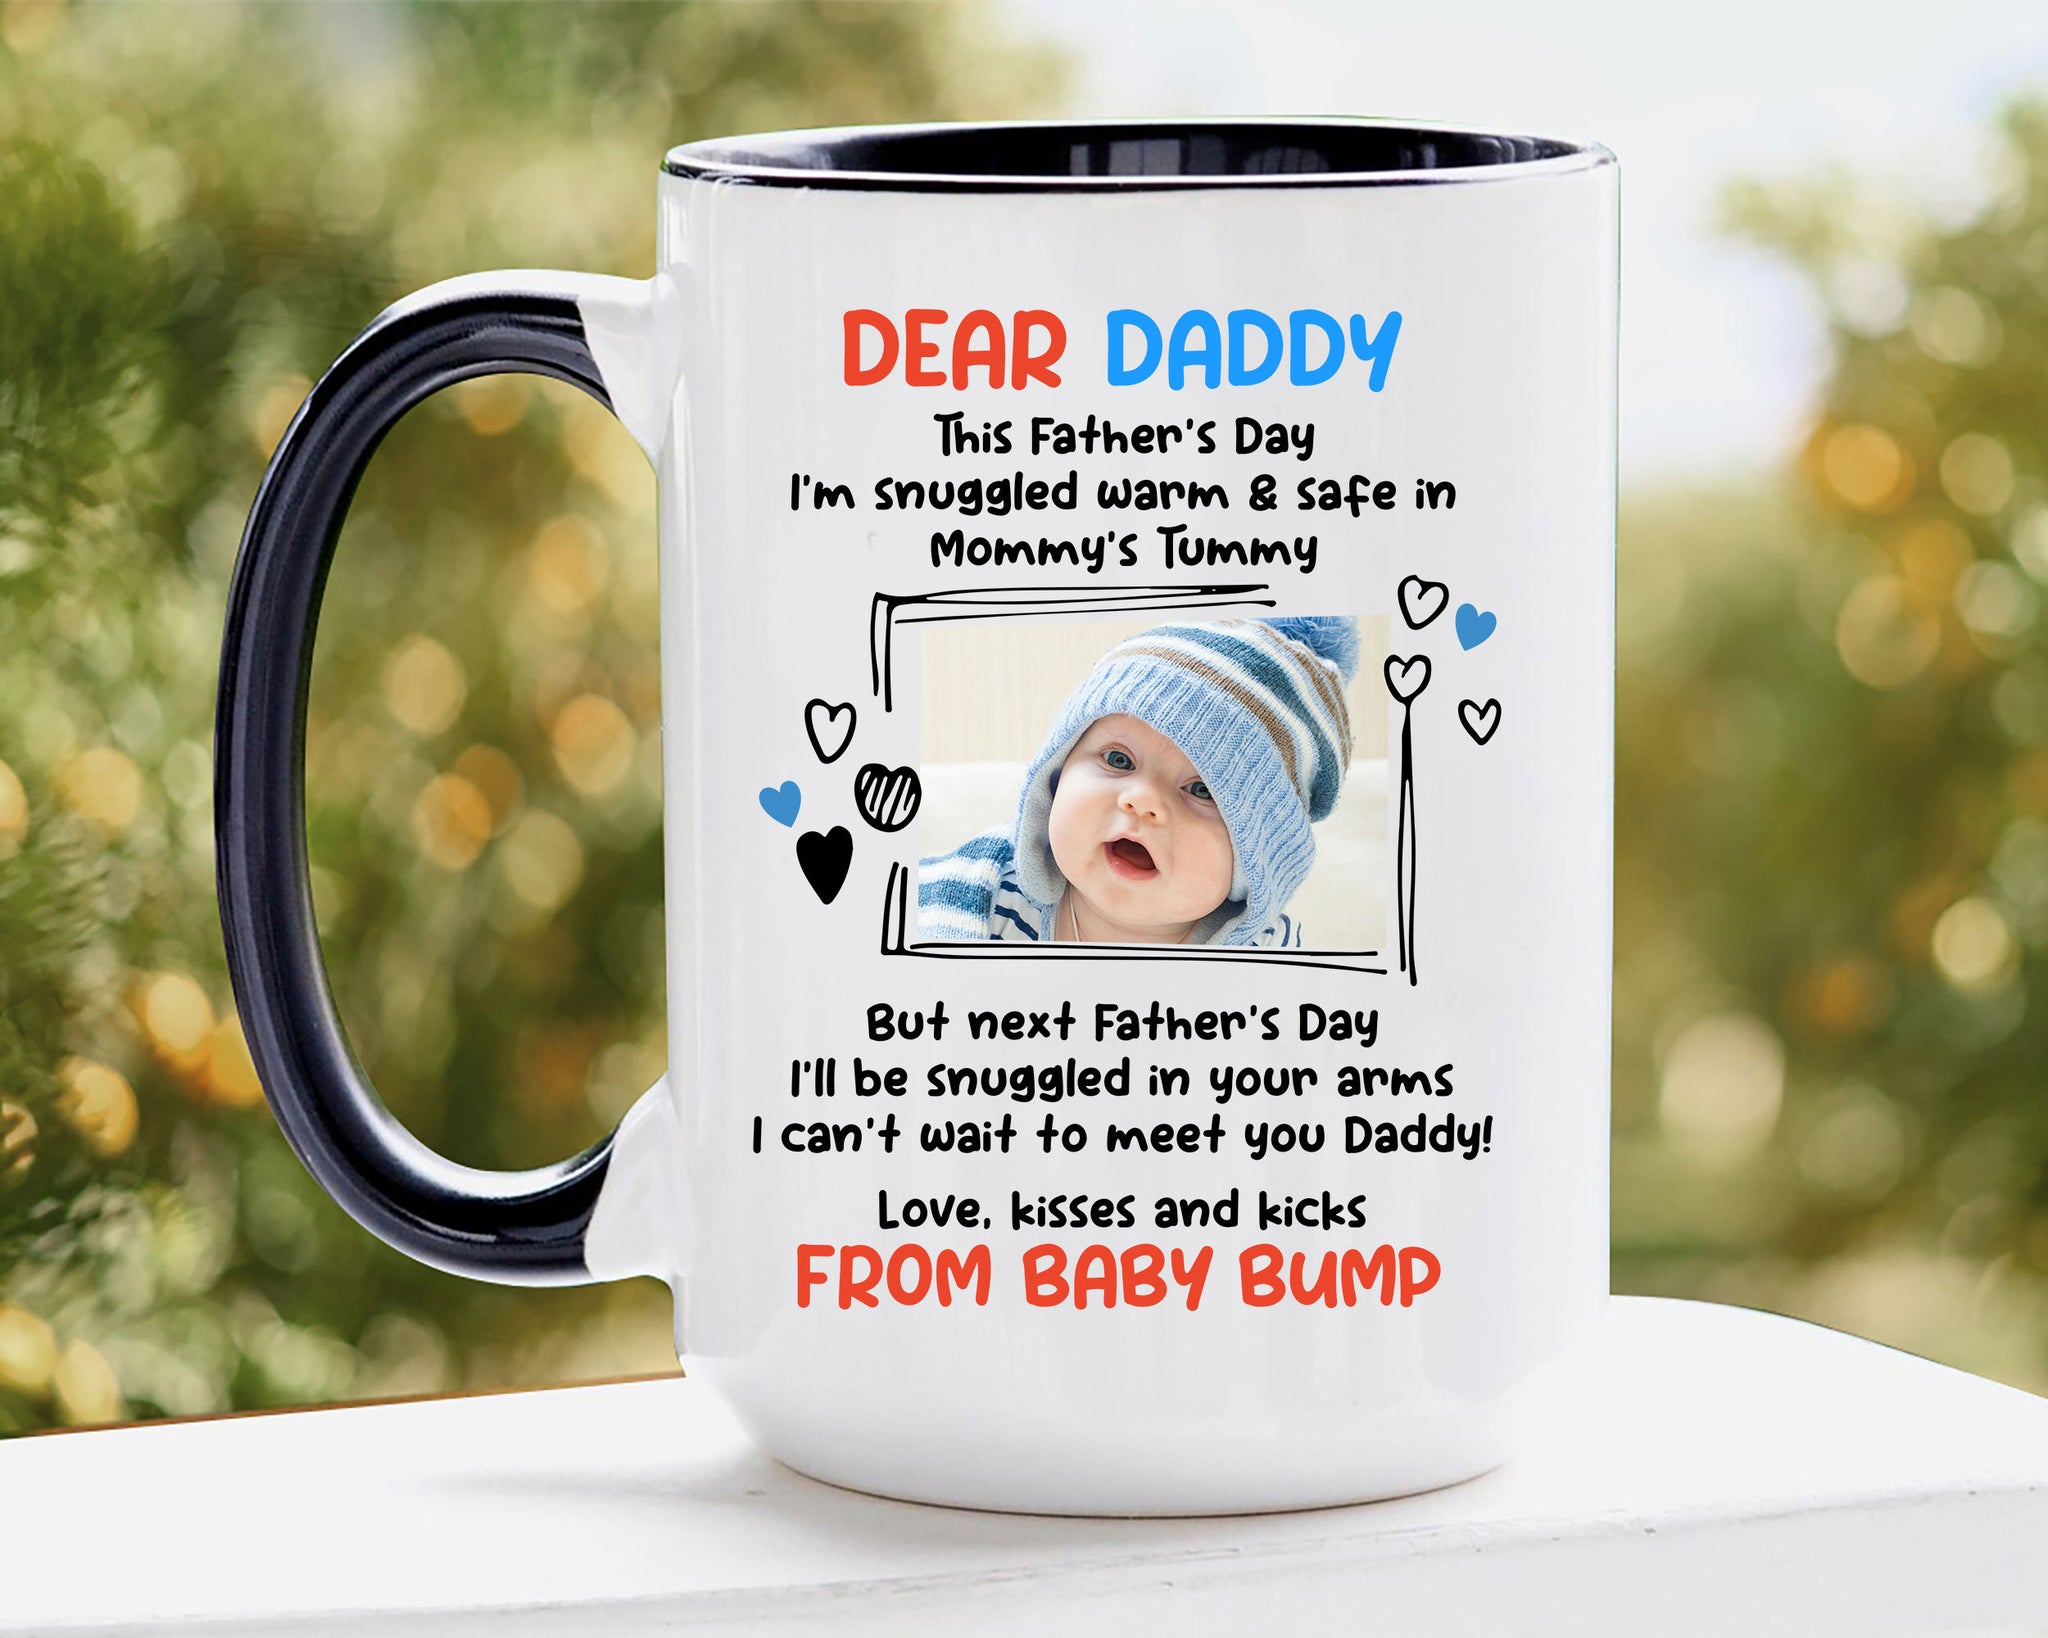 Personalized Dad Mug, Soon to be Daddy Coffee Mug, Custom Baby Ultrasound Photo Coffee Cup, Gift for Dad, New Dad, Father's Day Gift